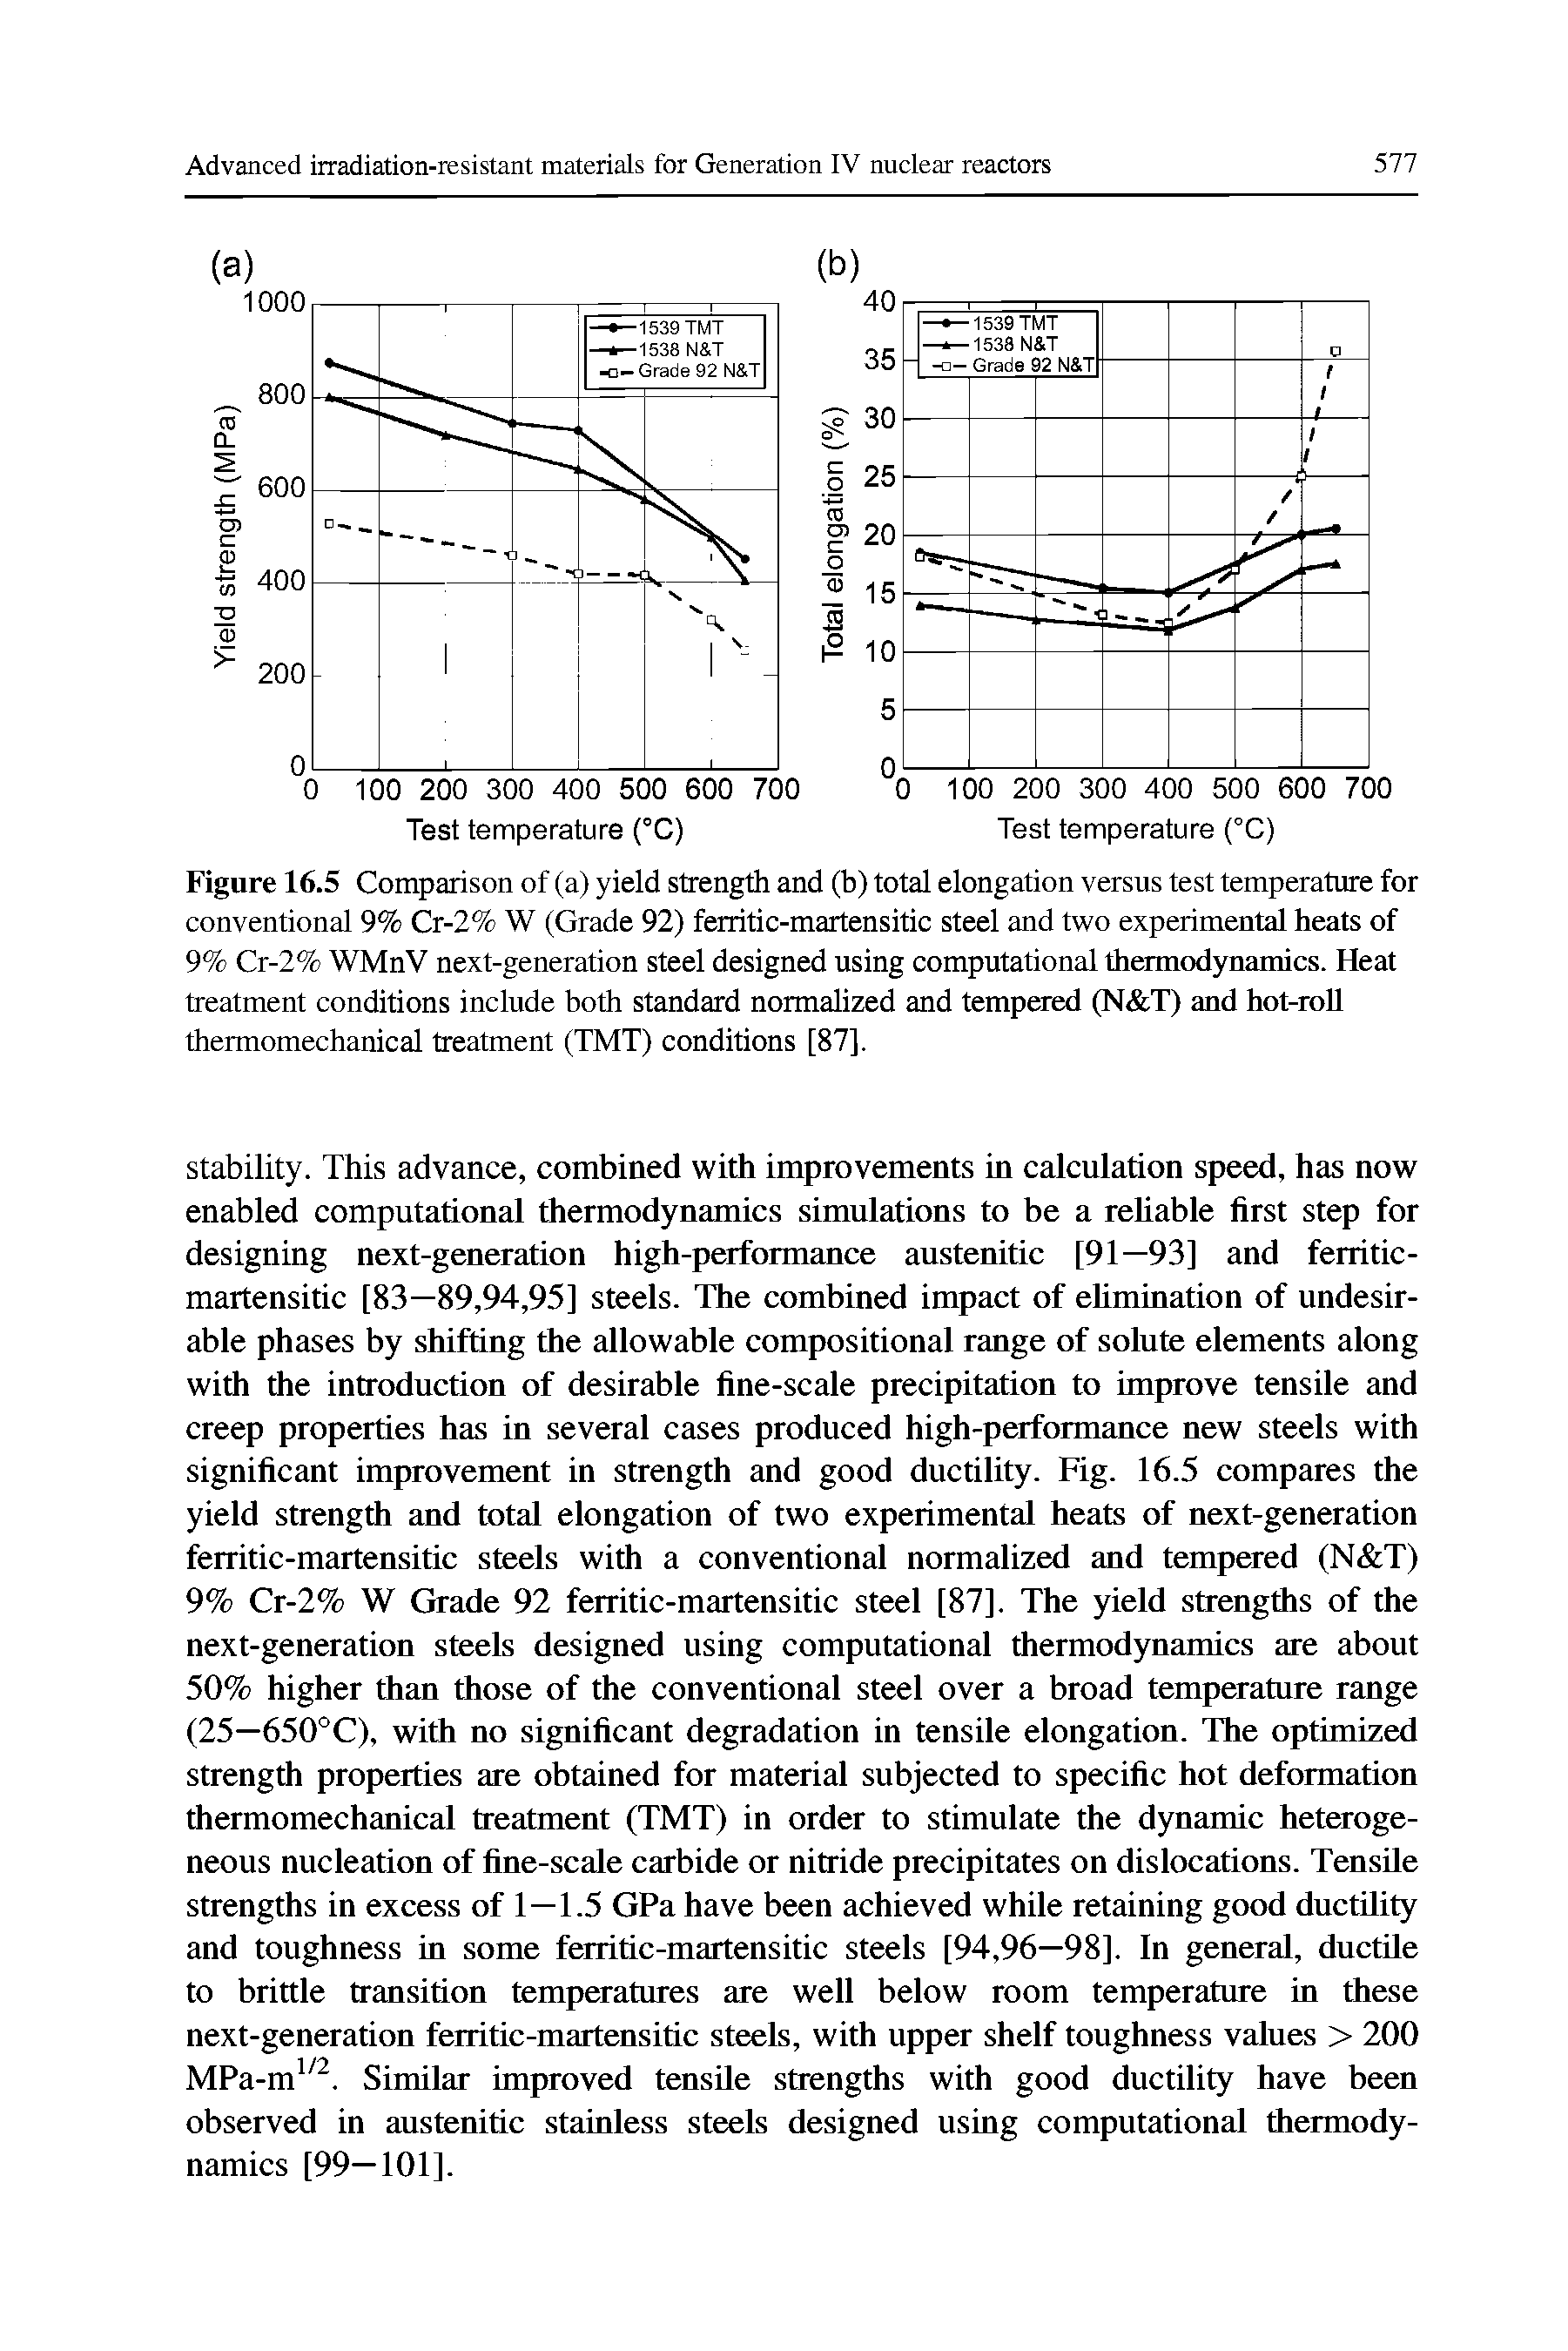 Figure 16.5 Comparison of (a) yield strength and (b) total elongation versus test temperature for conventional 9% Cr-2% W (Grade 92) ferritic-martensitic steel and two experimental heats of 9% Cr-2% WMnV next-generation steel designed using computational thermodynamics. Heat treatment conditions include both standard normalized and tempered (N T) and hot-roU thermomechanical treatment (TMT) conditions [87].